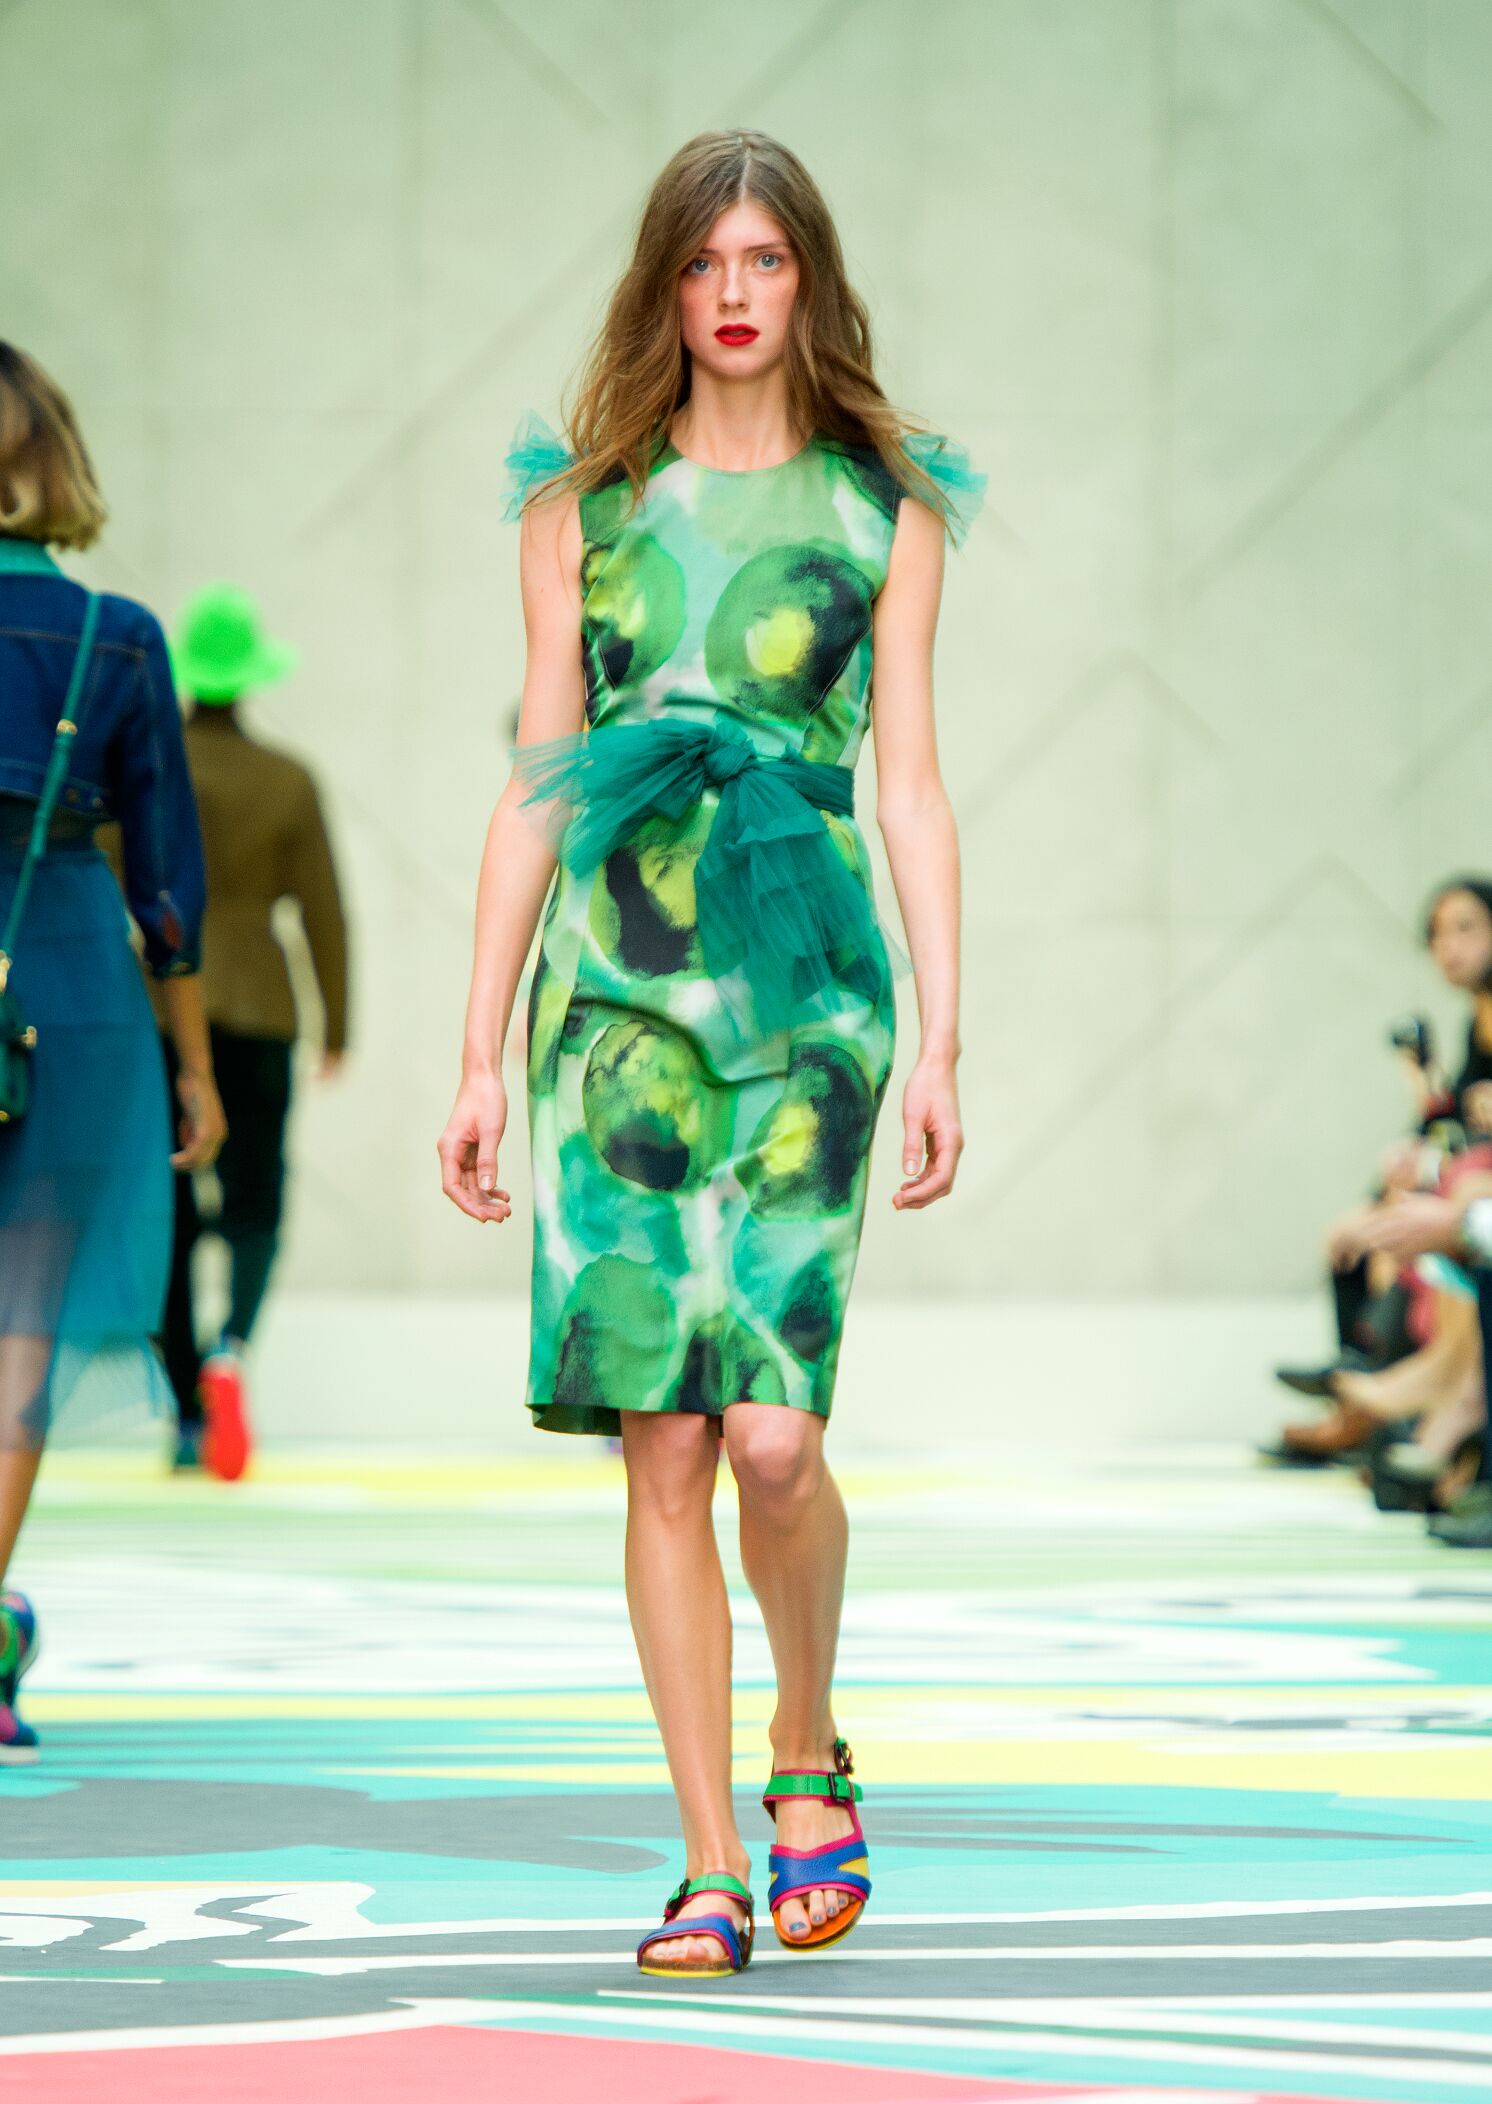 BURBERRY PRORSUM SPRING SUMMER 2015 WOMEN’S COLLECTION | The Skinny Beep